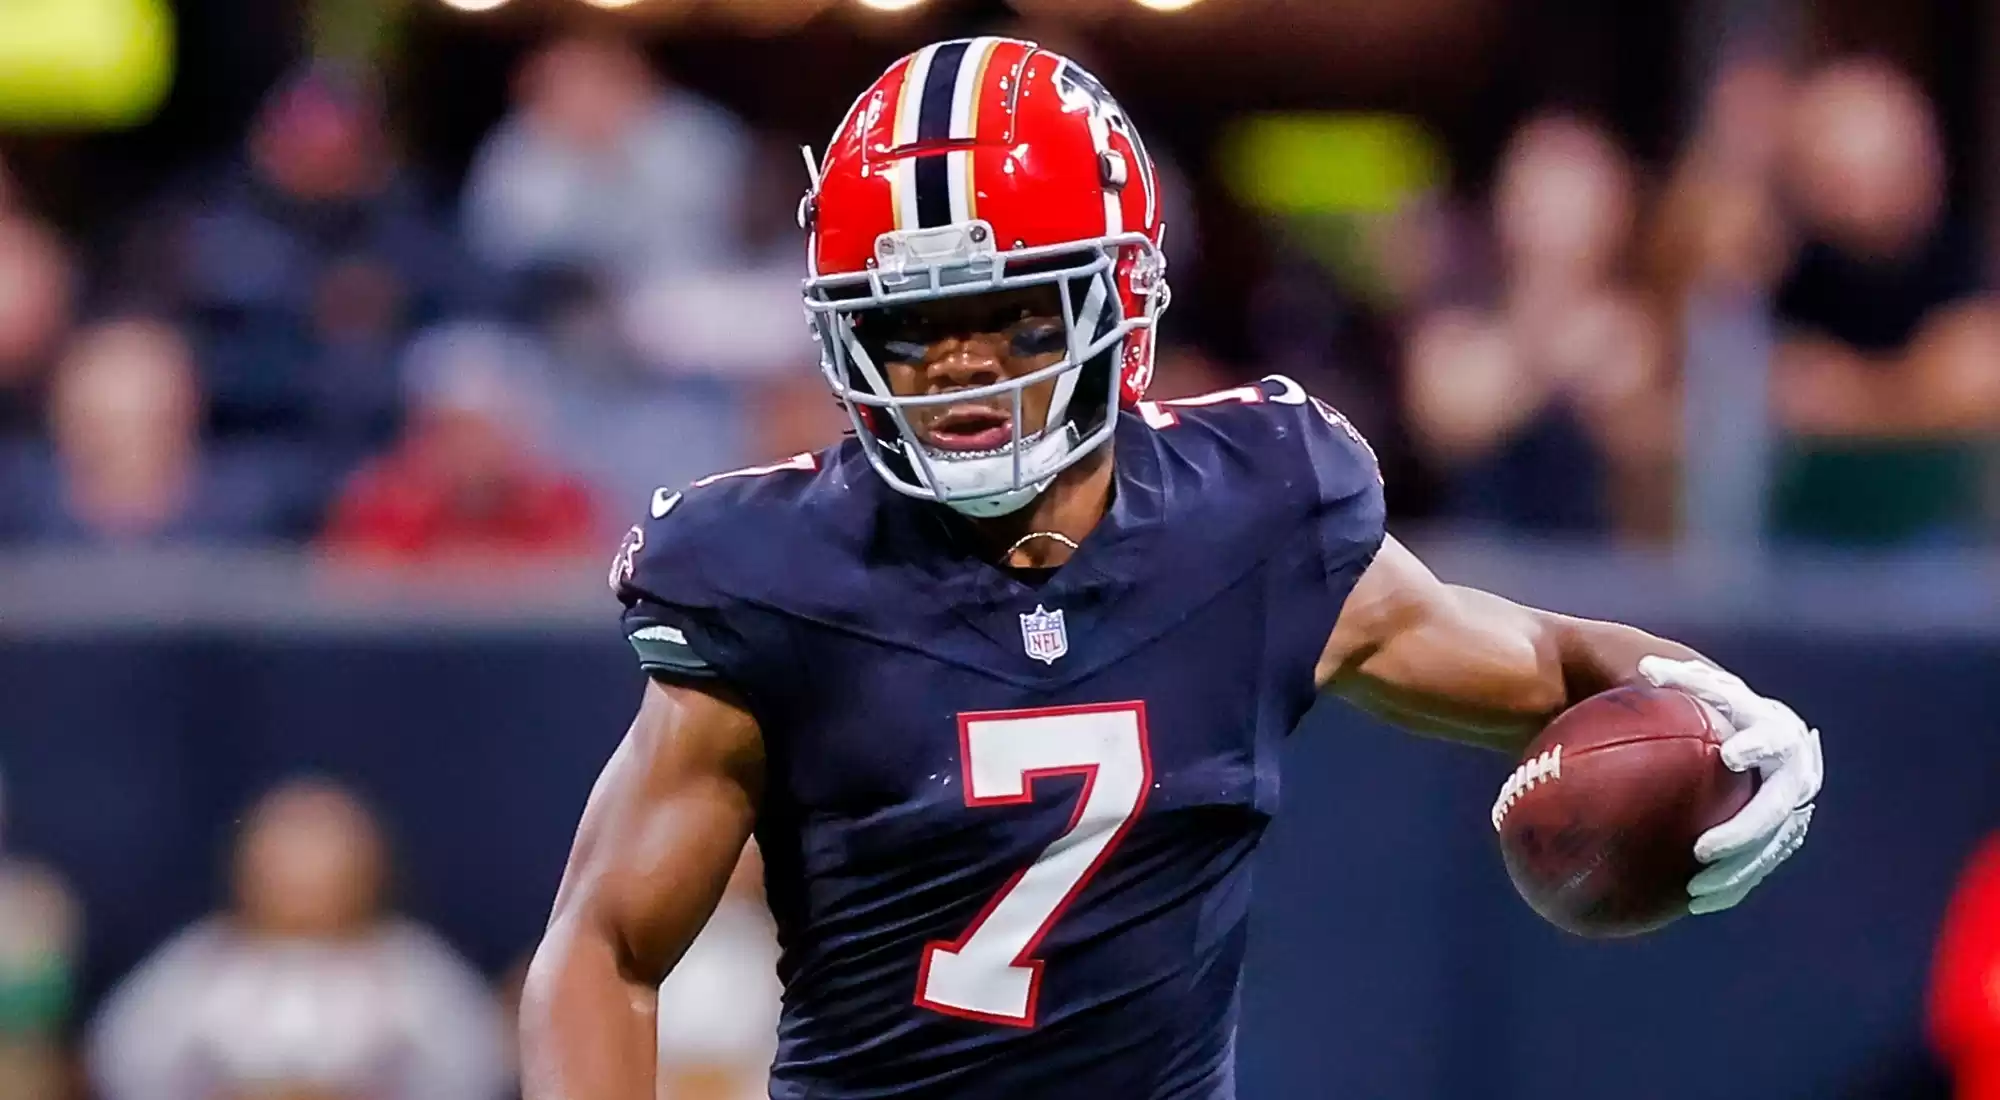 BREAKING: NFL Investigates Bijan Robinson's Absence vs. Bucs, Falcons Potentially Facing Sanctions